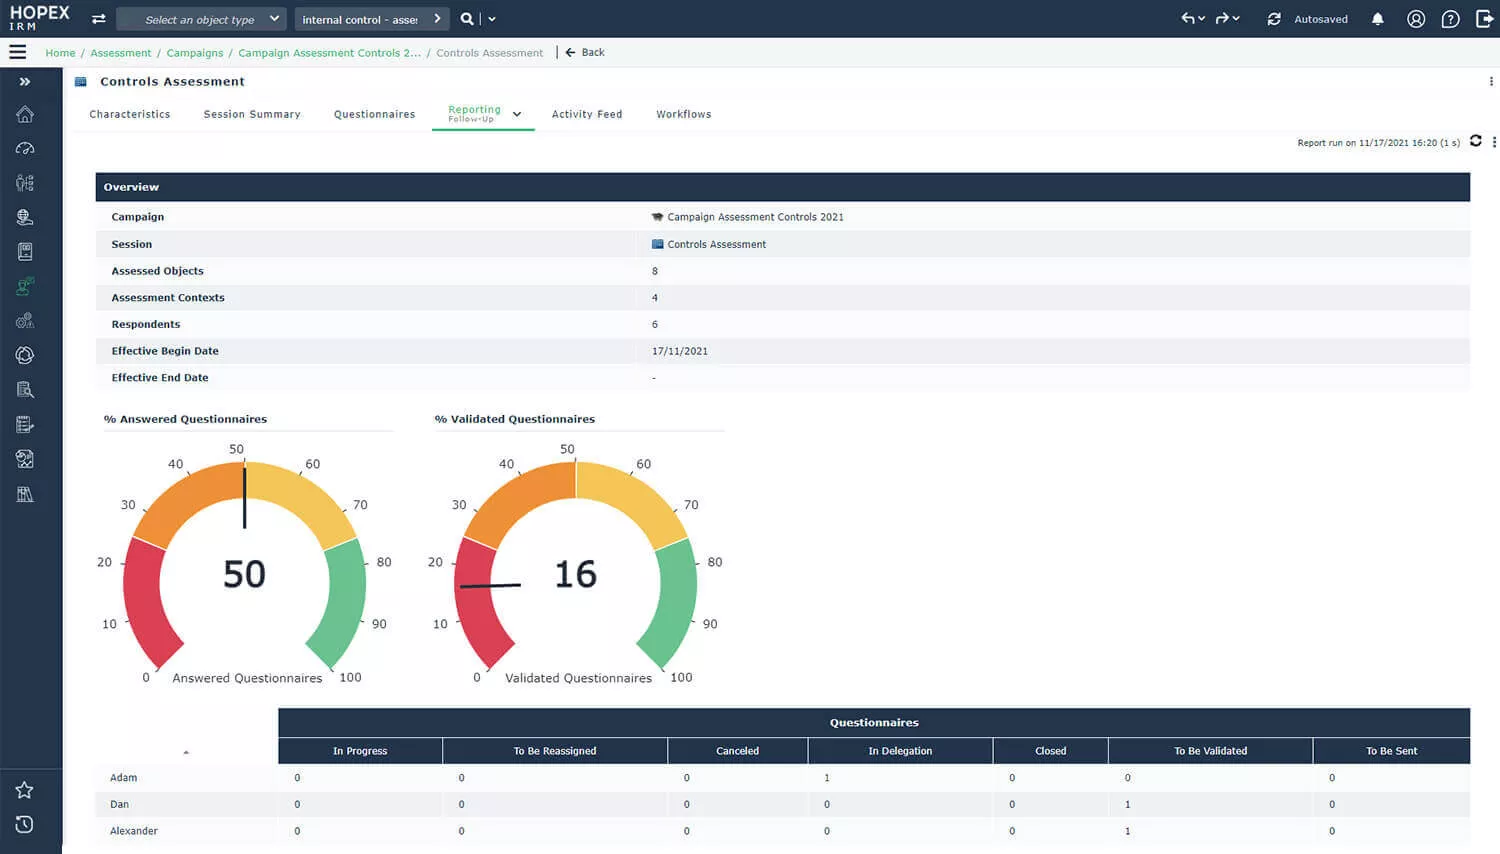 Monitor and report compliance status in real-time